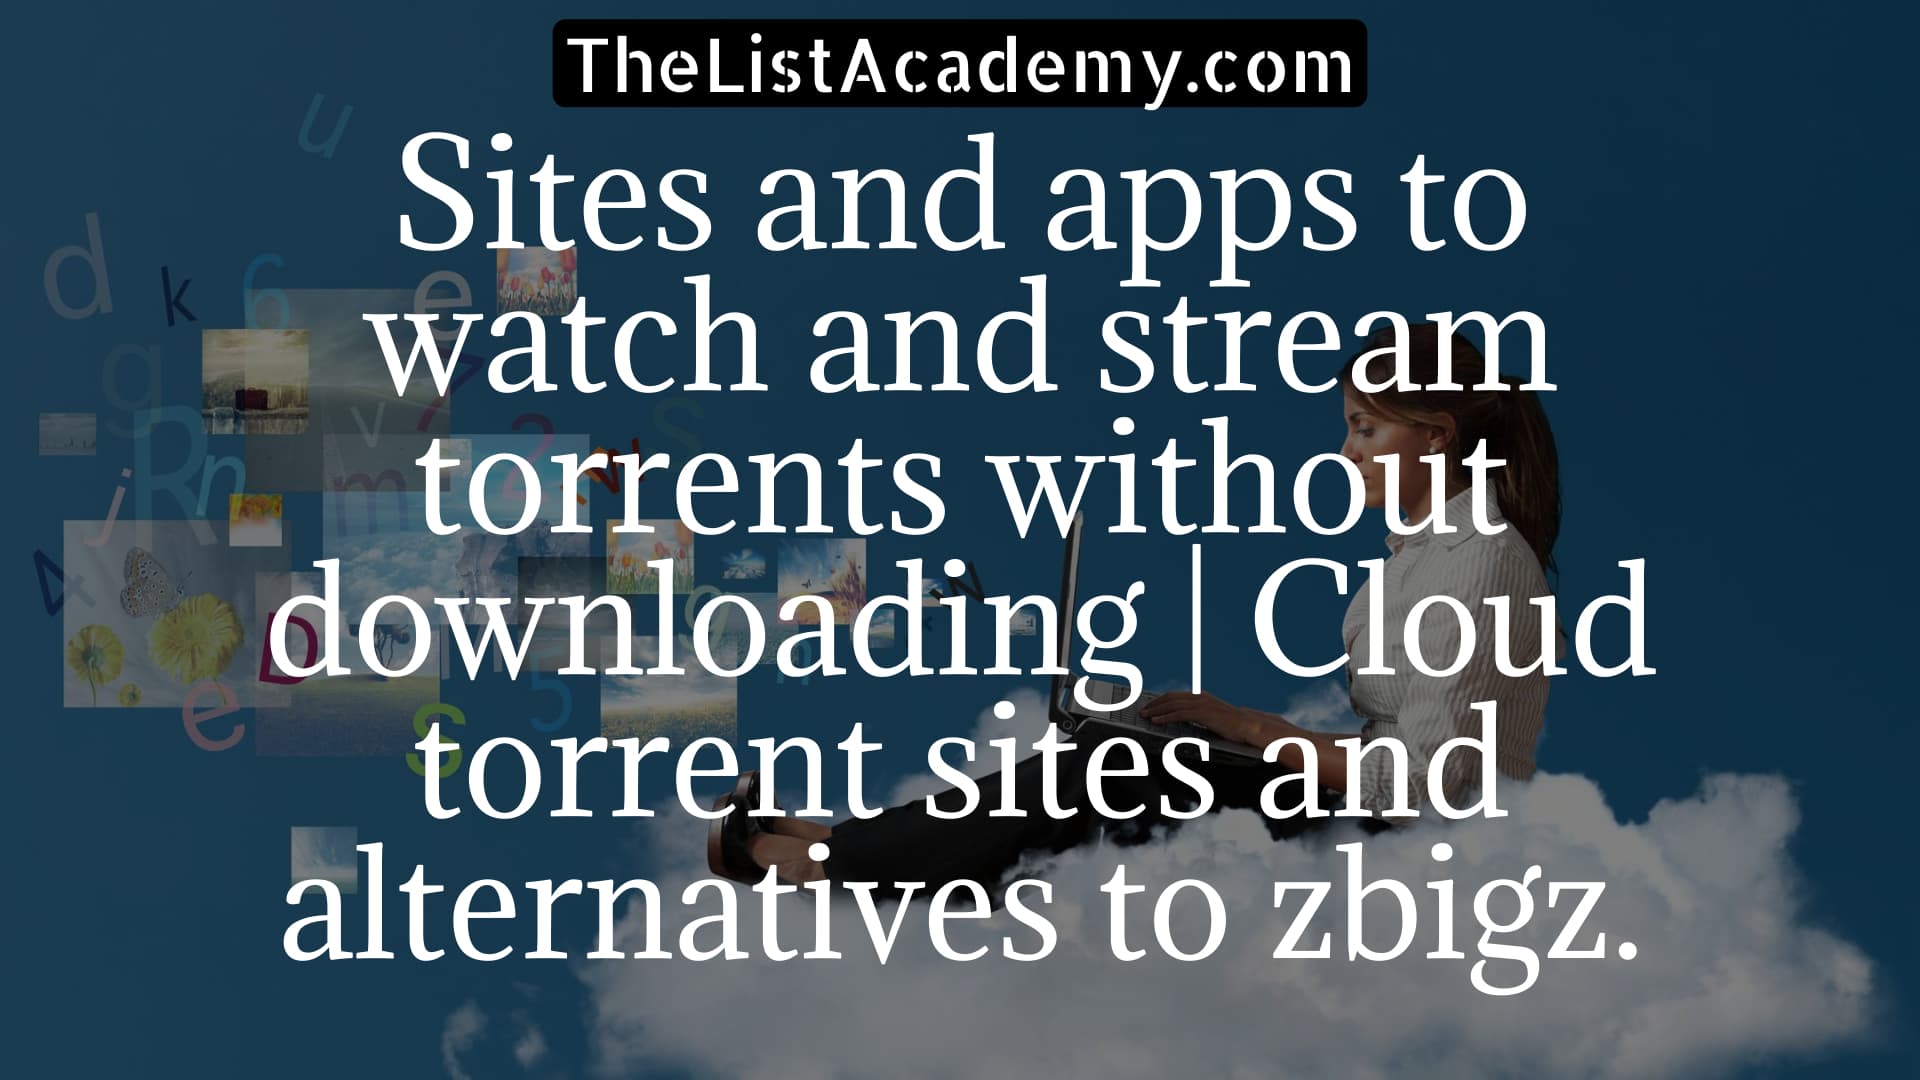 Cover Image For List : 25 Sites And Apps To Watch And Stream Torrents Without Downloading | Cloud Torrent Sites And Alternatives To Zbigz.